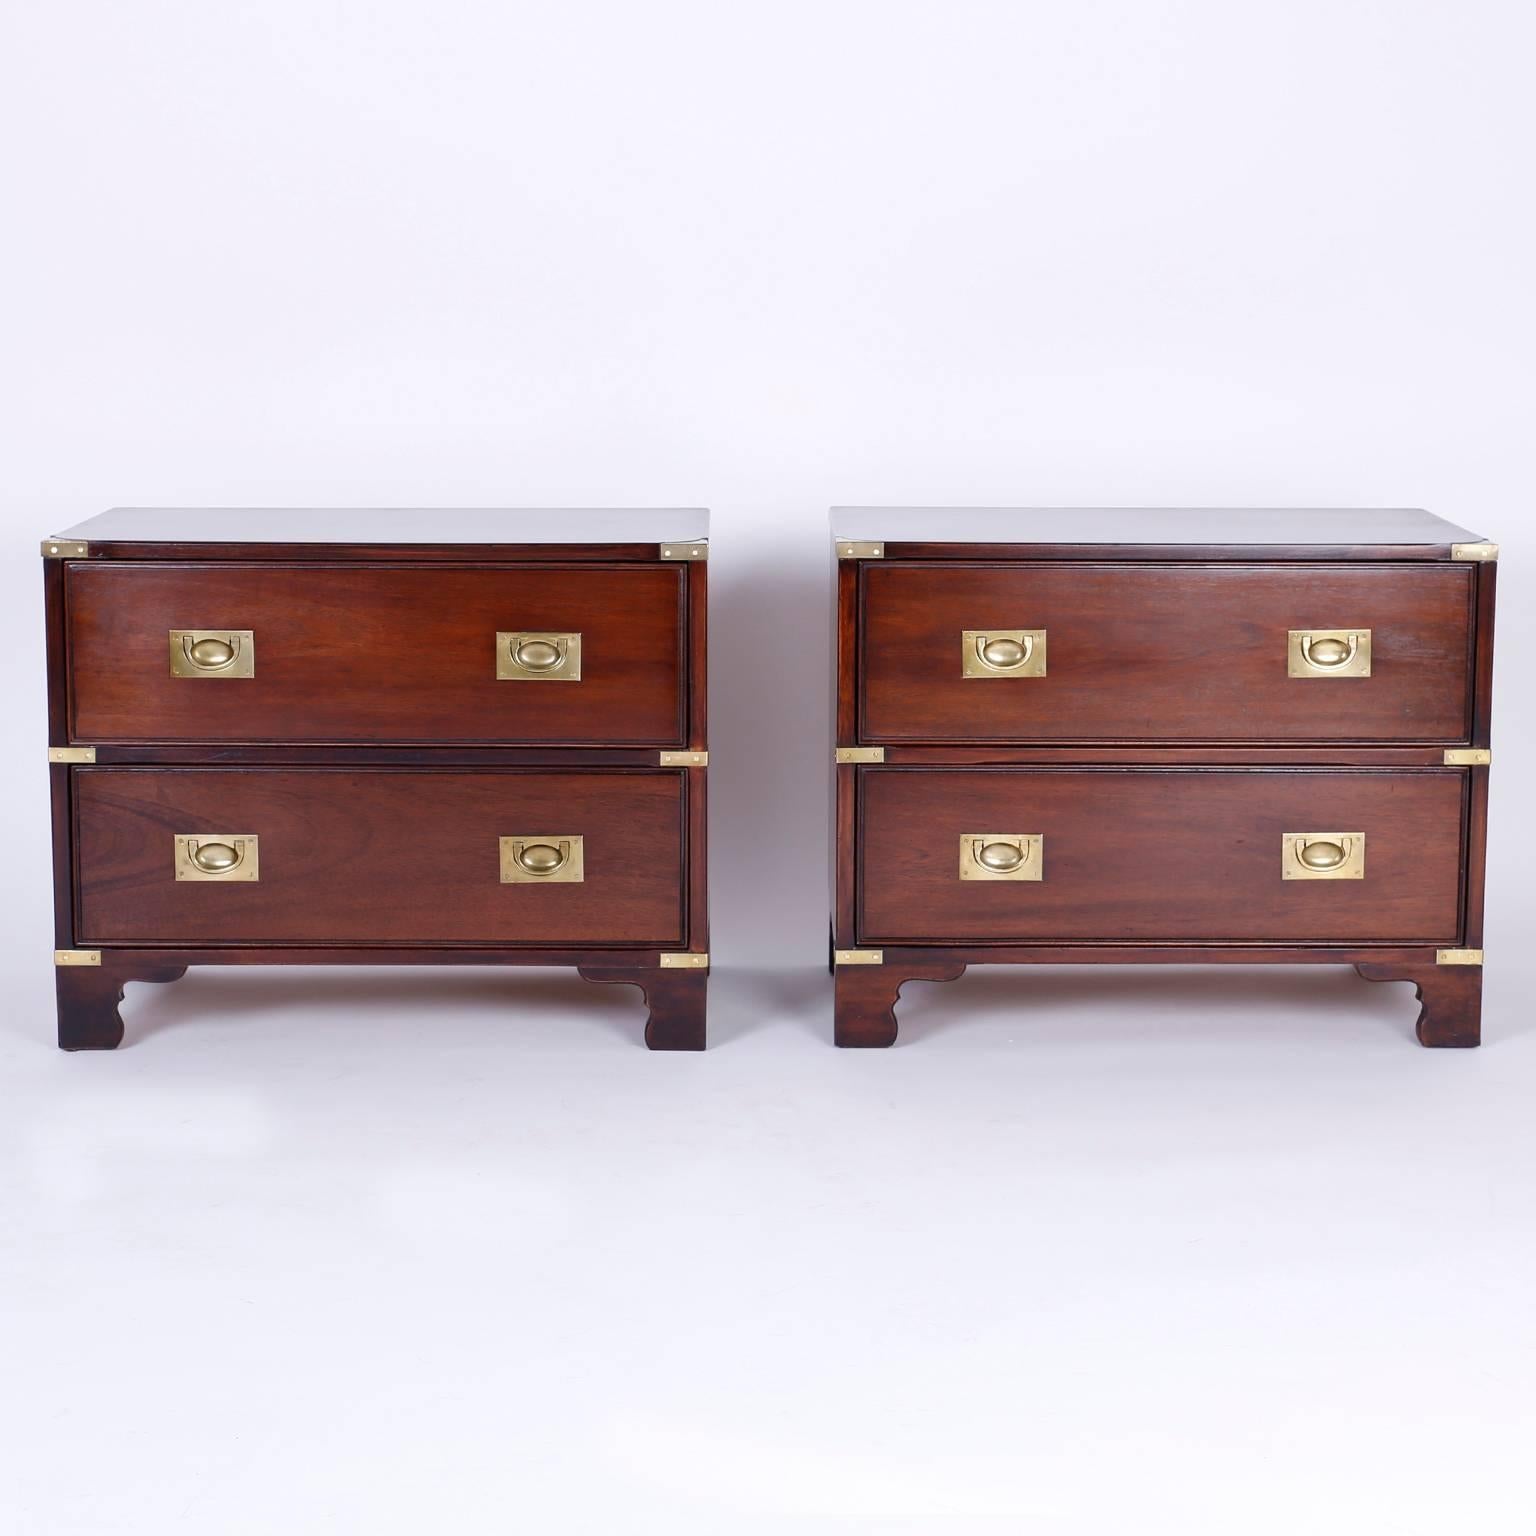 Dapper pair of Mid-Century mahogany nightstands or two-drawer chests with Campaign style and brass hardware set on bracket feet. 

